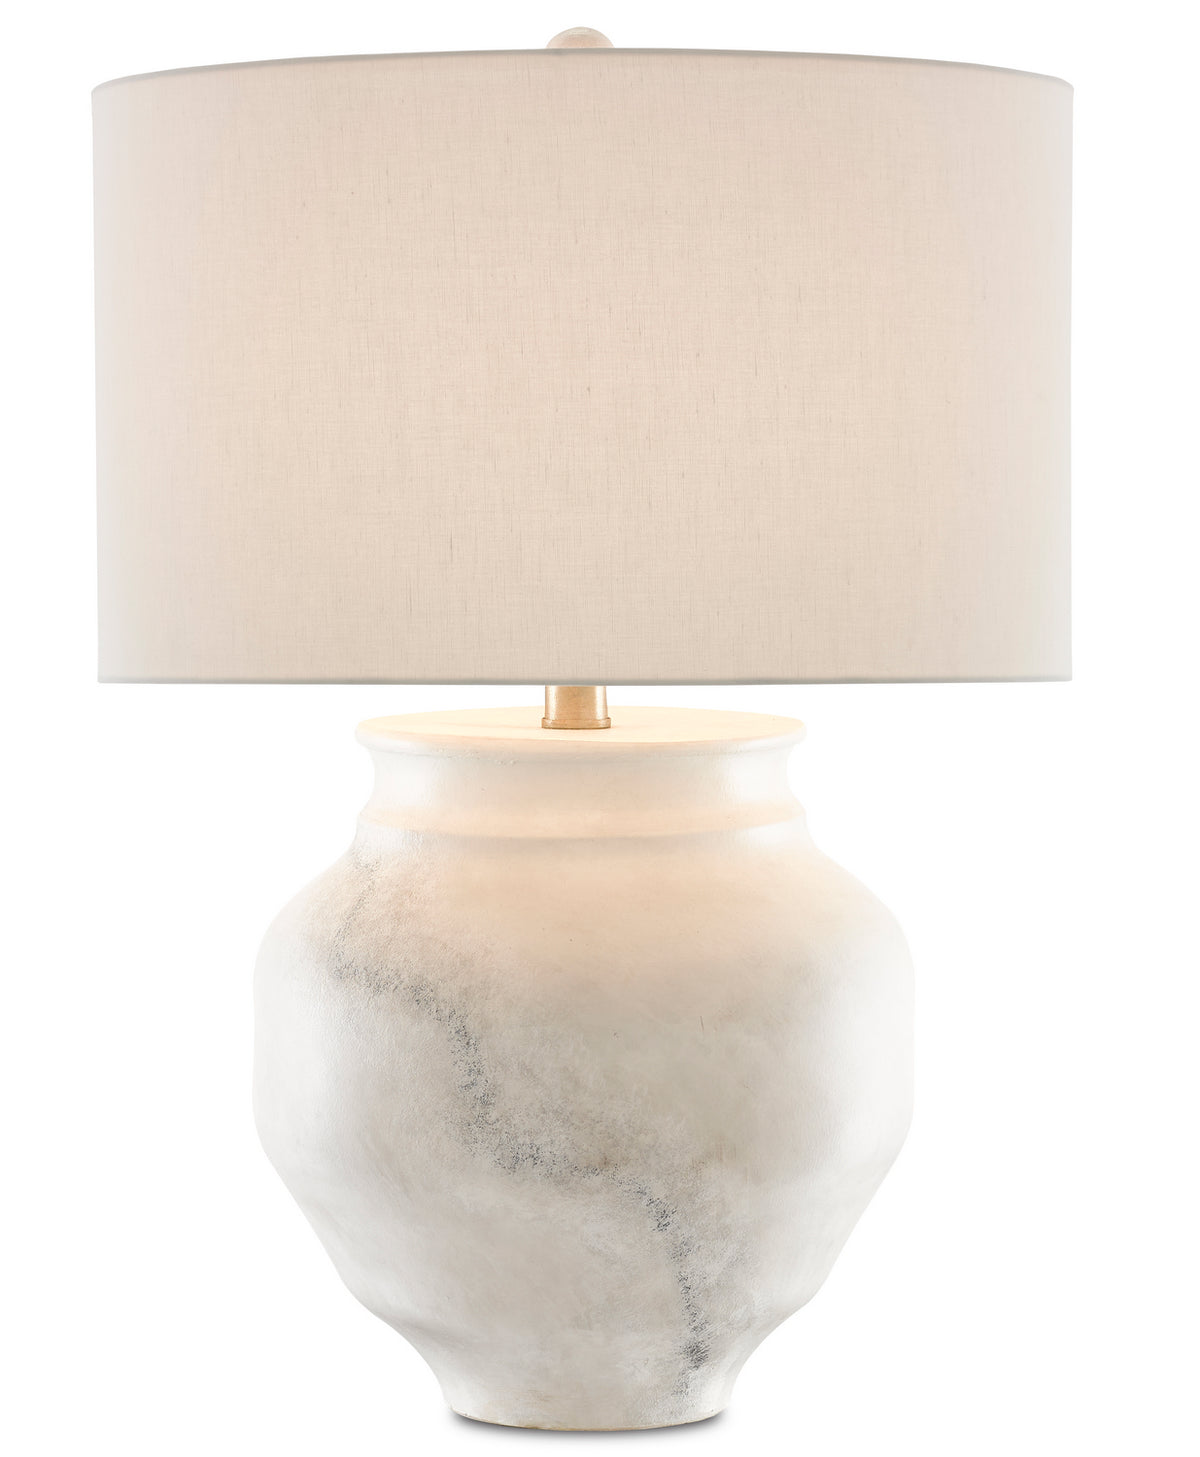 Currey and Company - 6000-0623 - One Light Table Lamp - Kalossi - White/Gray/Contemporary Silver Leaf